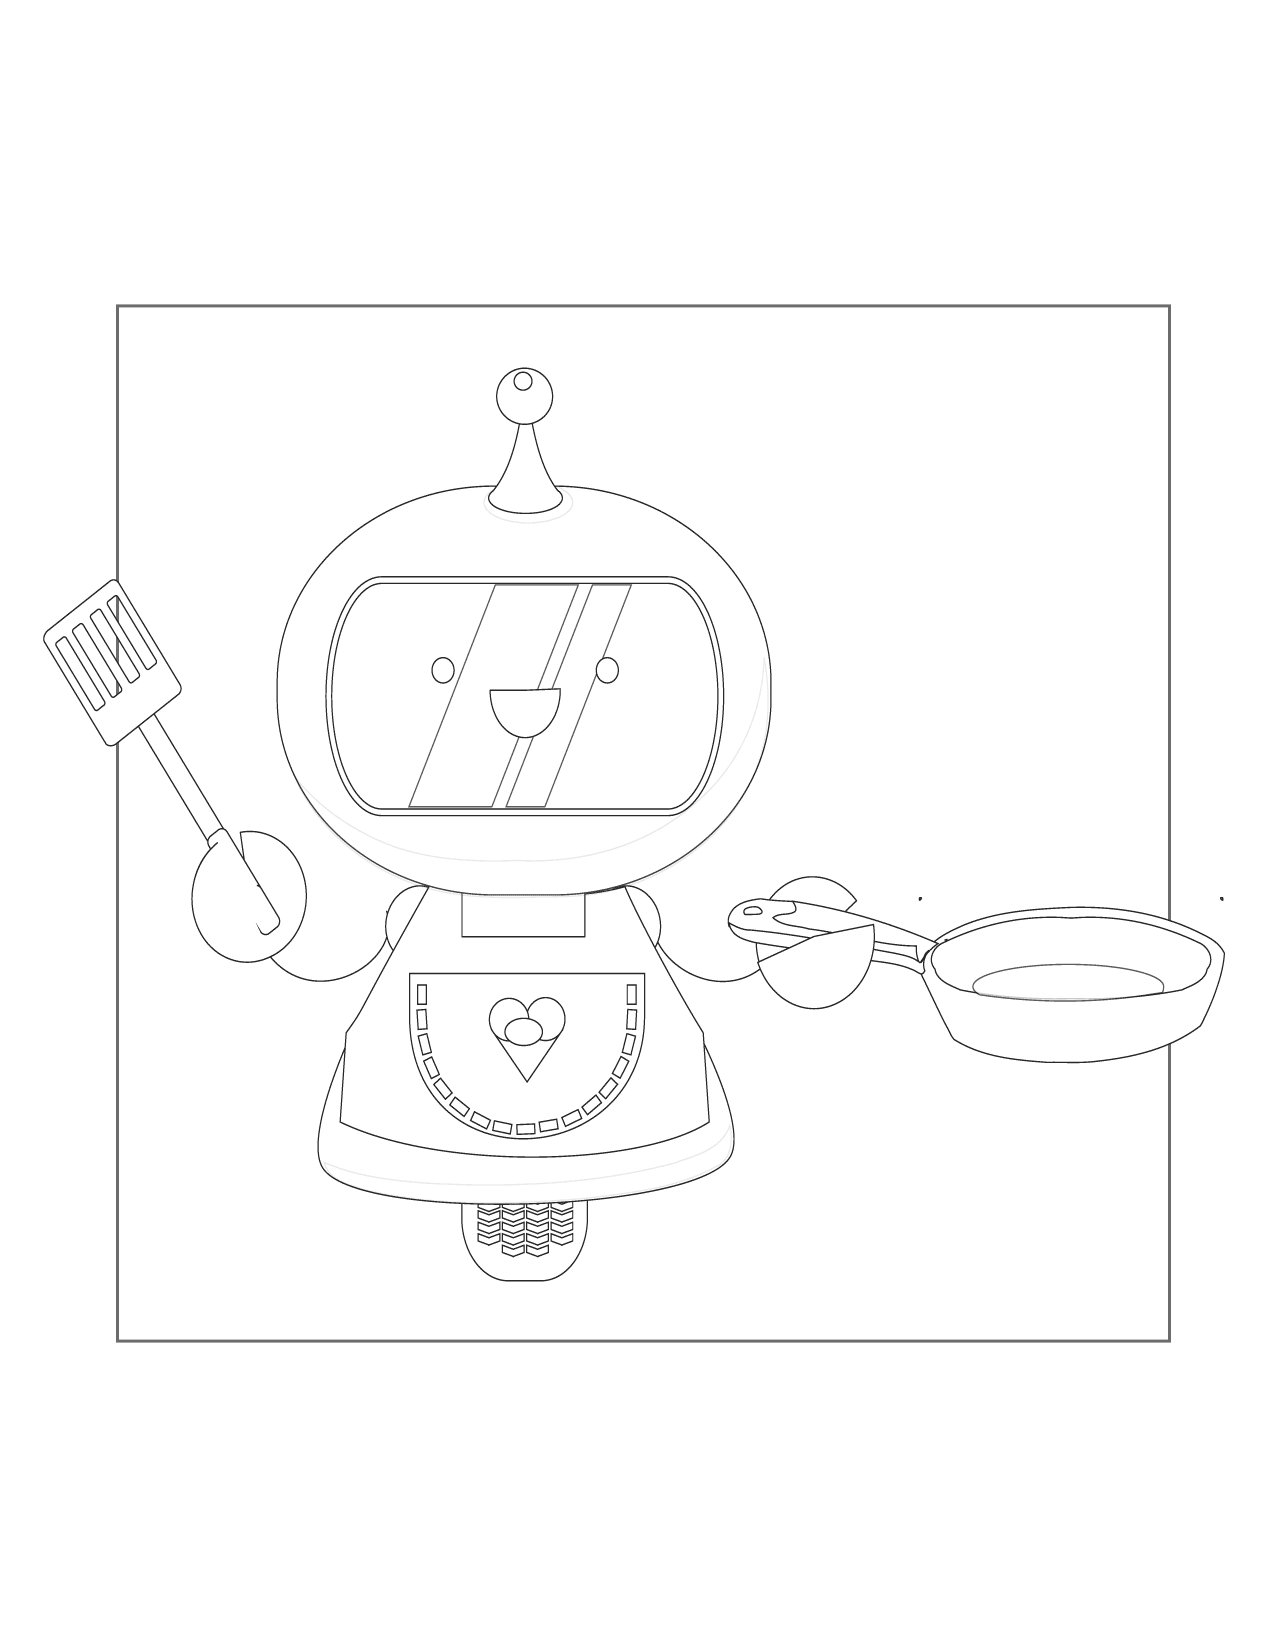 Robot Making Breakfast Coloring Page